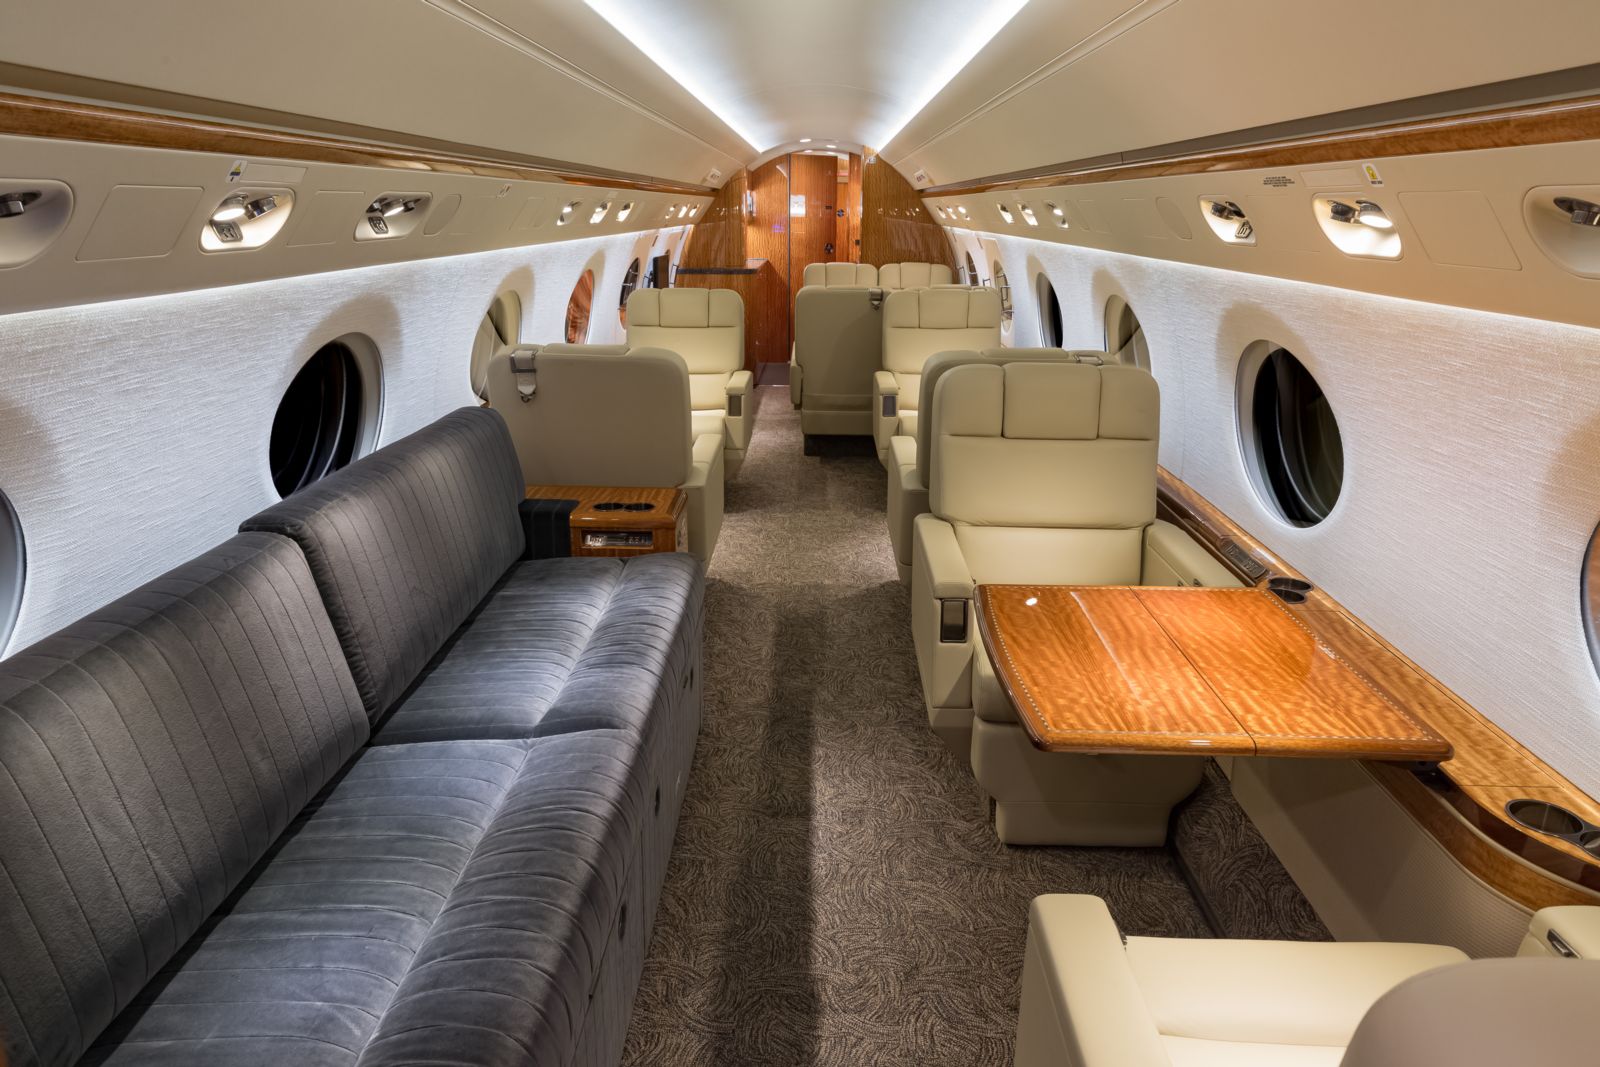 Gulfstream G550  S/N 5390 for sale | gallery image: /userfiles/images/aircraft-listing/Gulfstream_G550_sn5390/bfp_8034.jpg